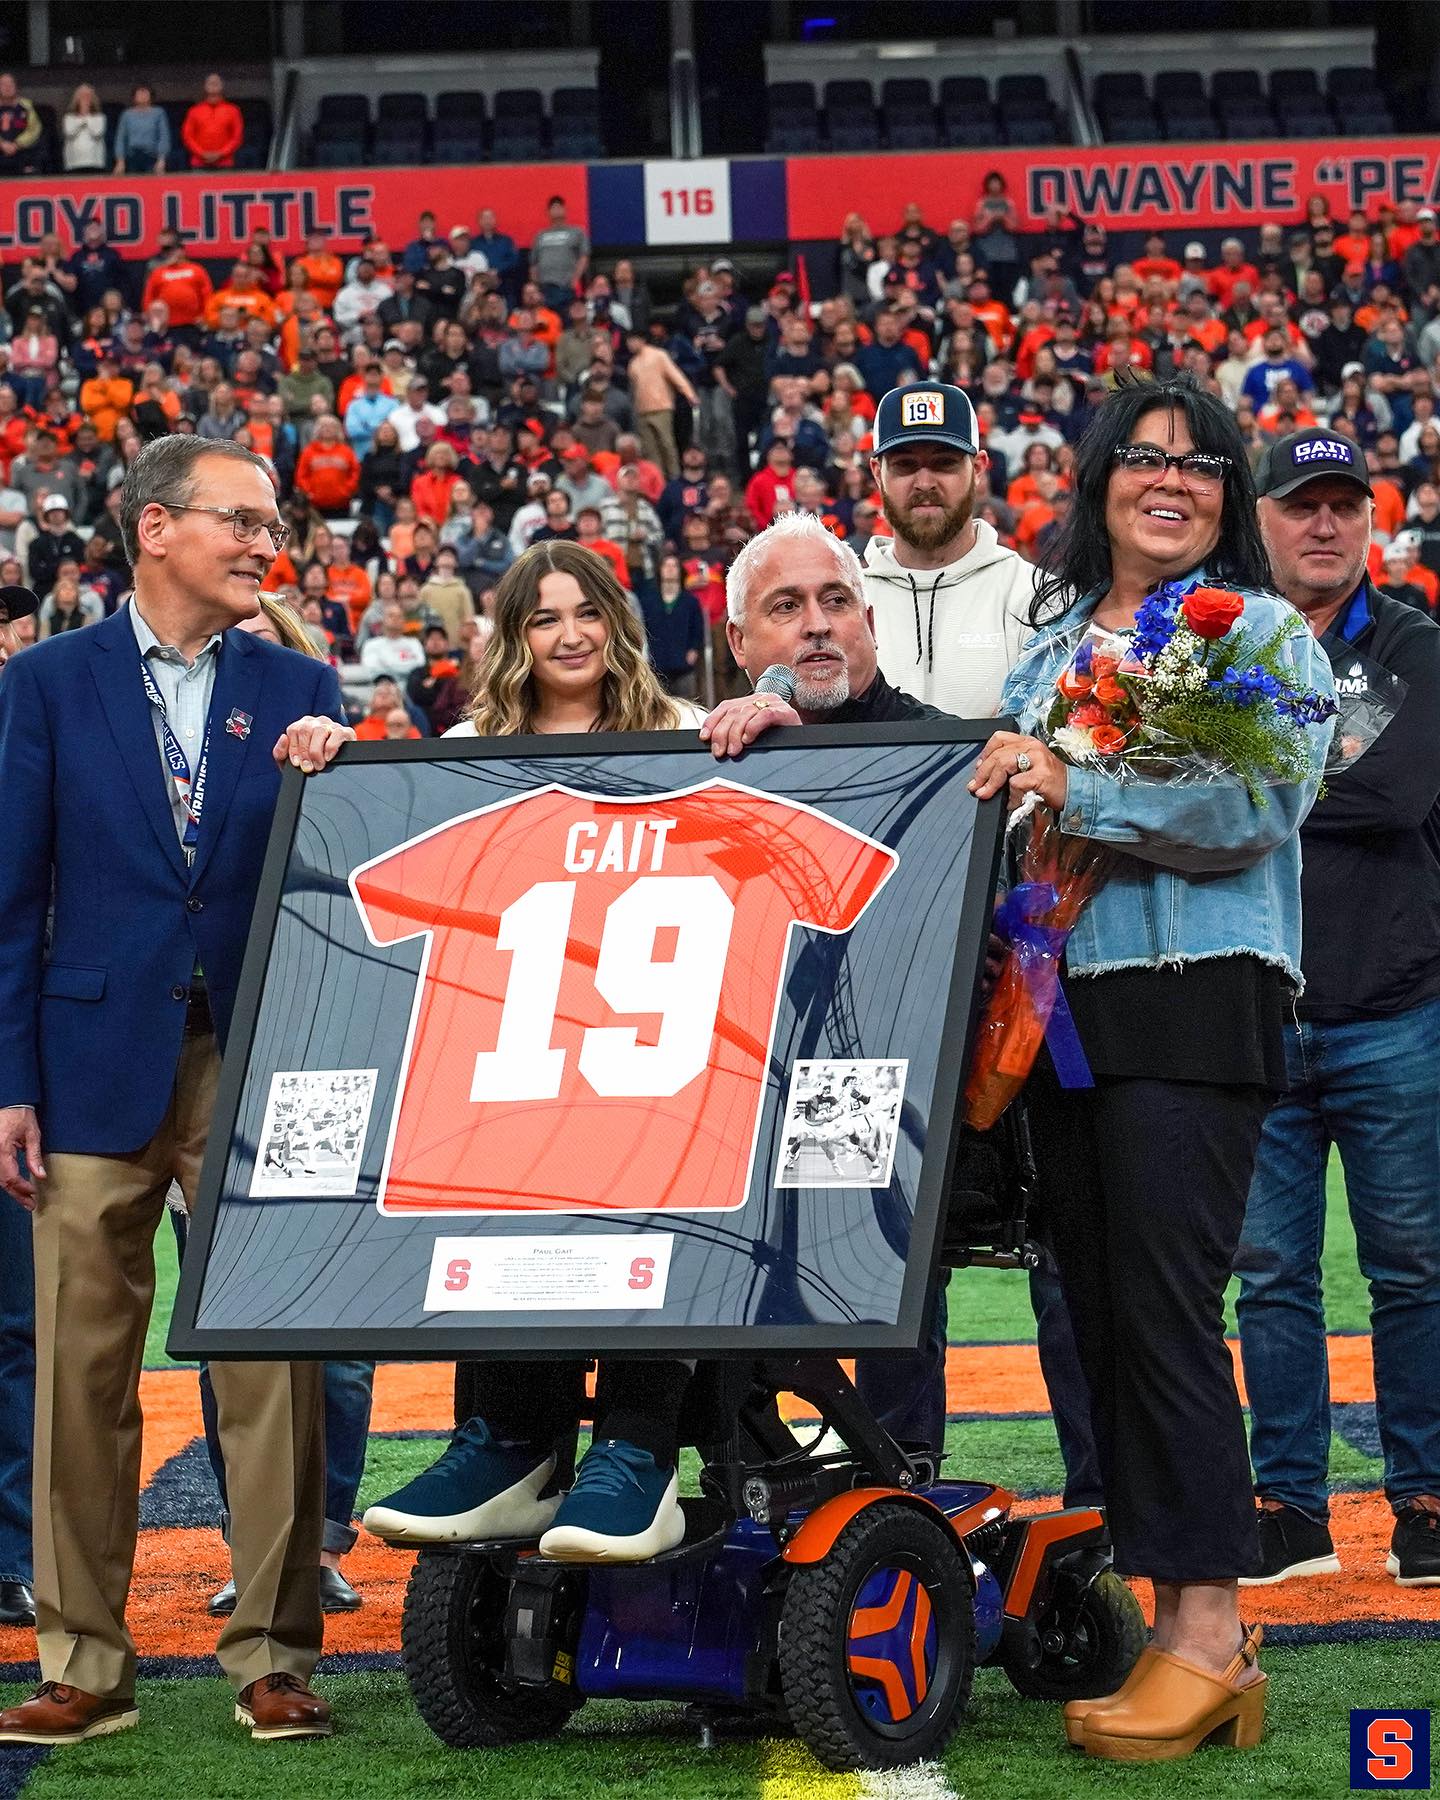 Man in wheelchair holding a framed orange 19 jersey with Gait written above the number surrounded by people.